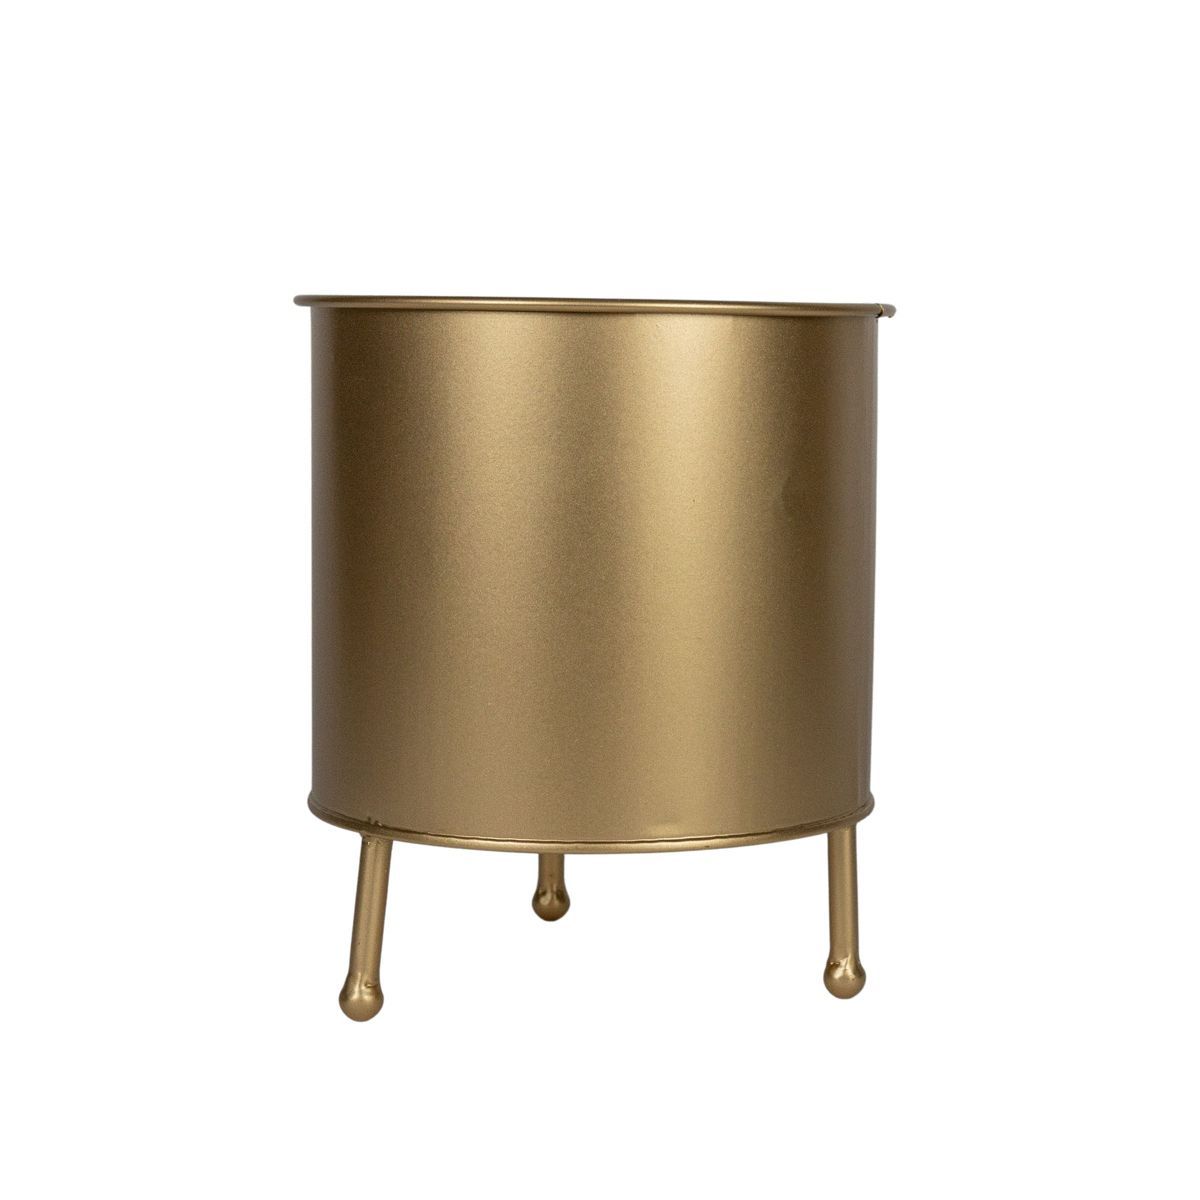 Raised Brass Metal Planter by Foreside Home & Garden | Target